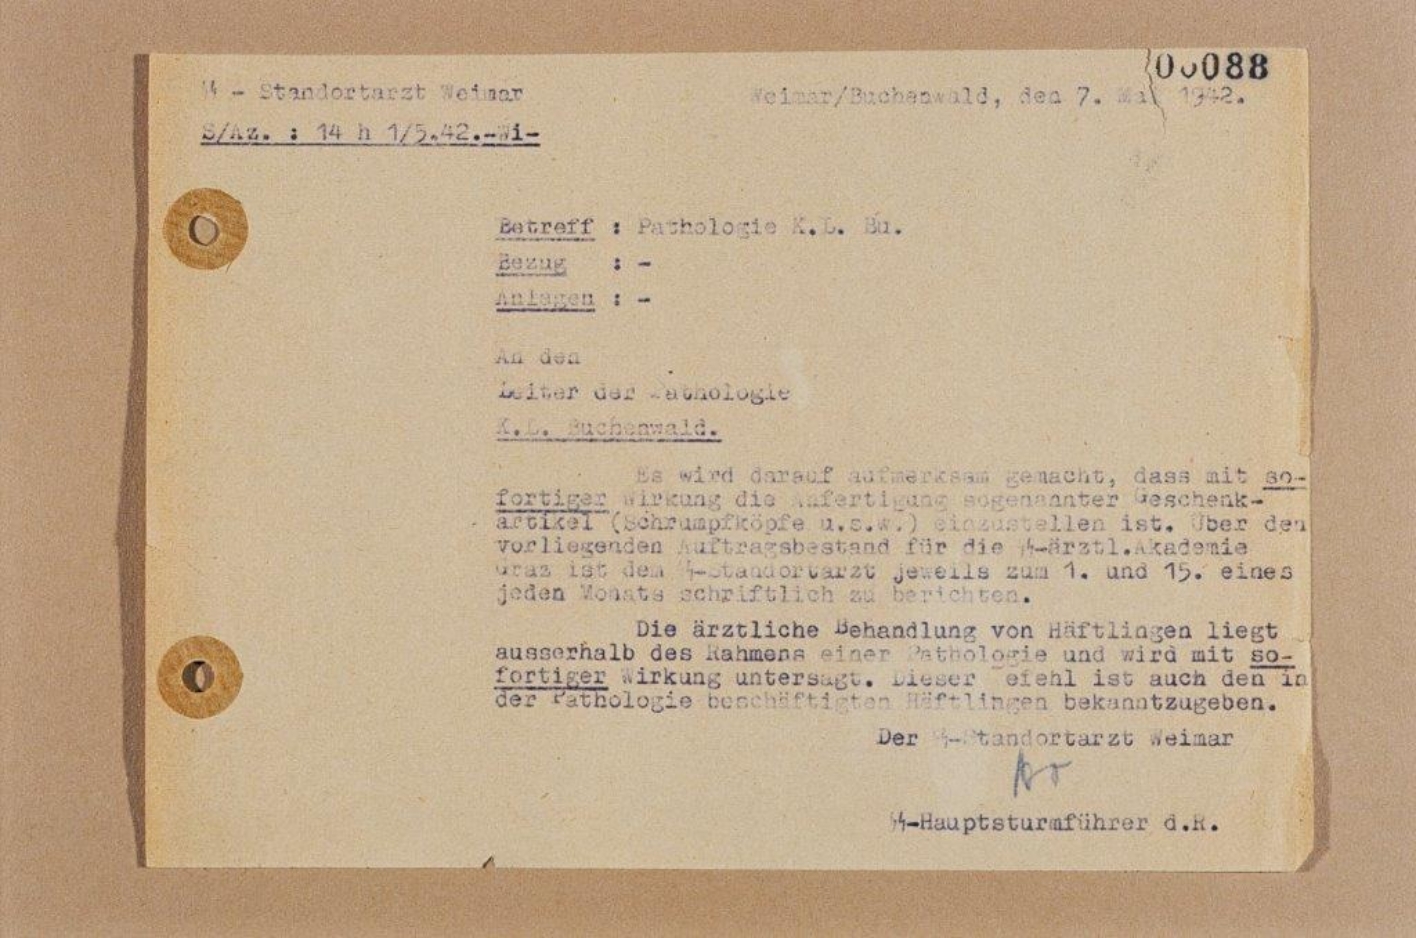 On display is a document dated 1 May 1942 in which the SS town doctor Hoven forbids the production of "gift articles" from human remains. In addition, the pathology department of Buchenwald concentration camp was forbidden from providing medical treatment to prisoners.